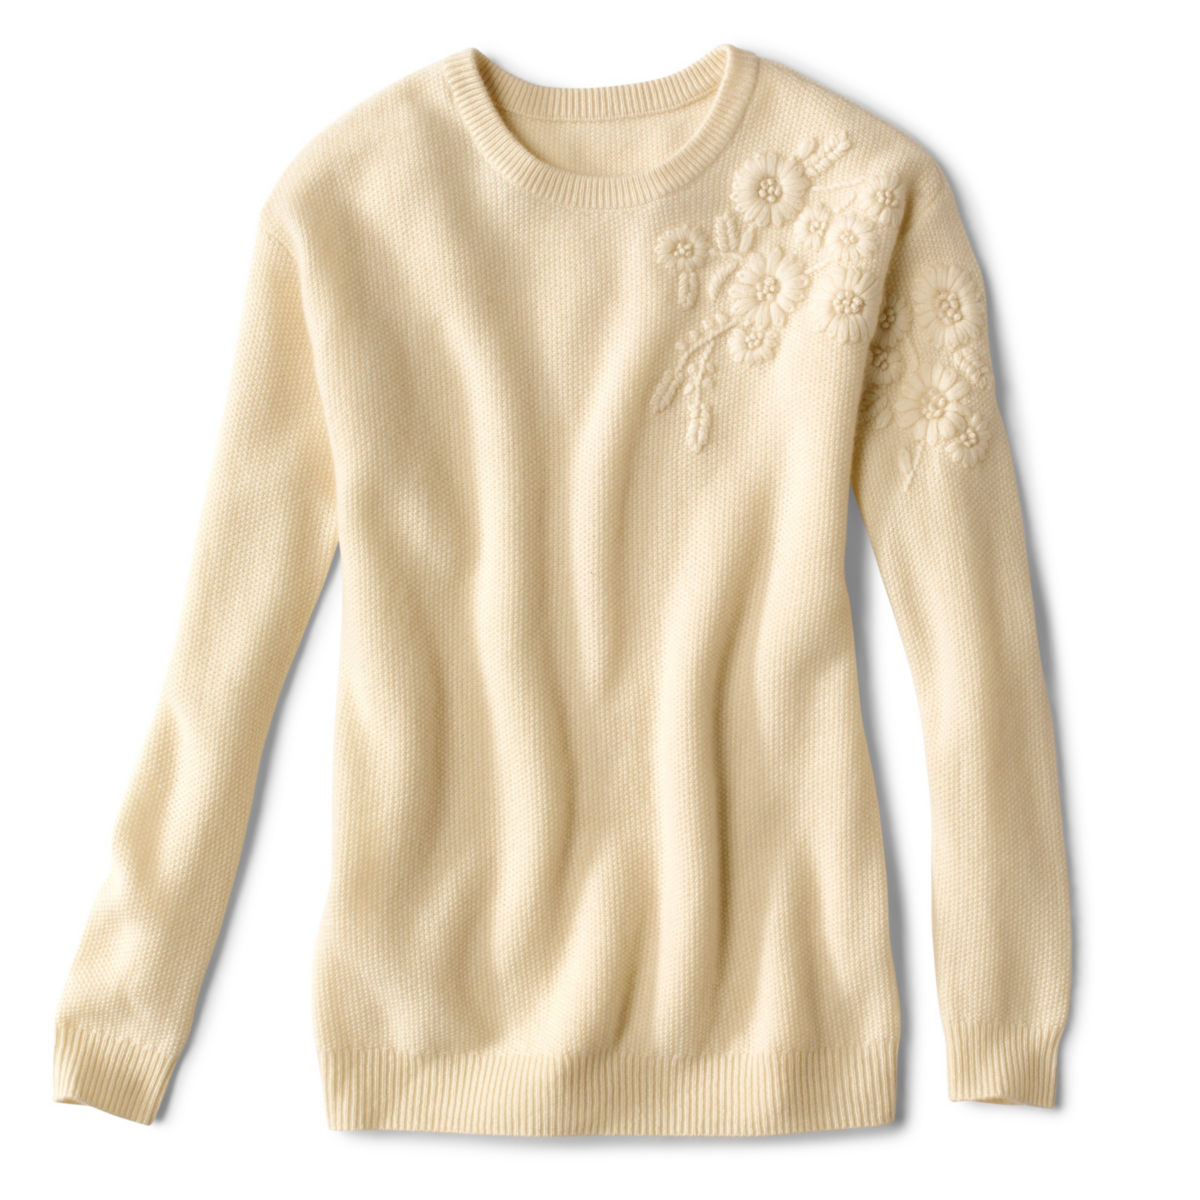 Natural Cashmere Embroidered Sweater - LIGHT NATURALimage number 0